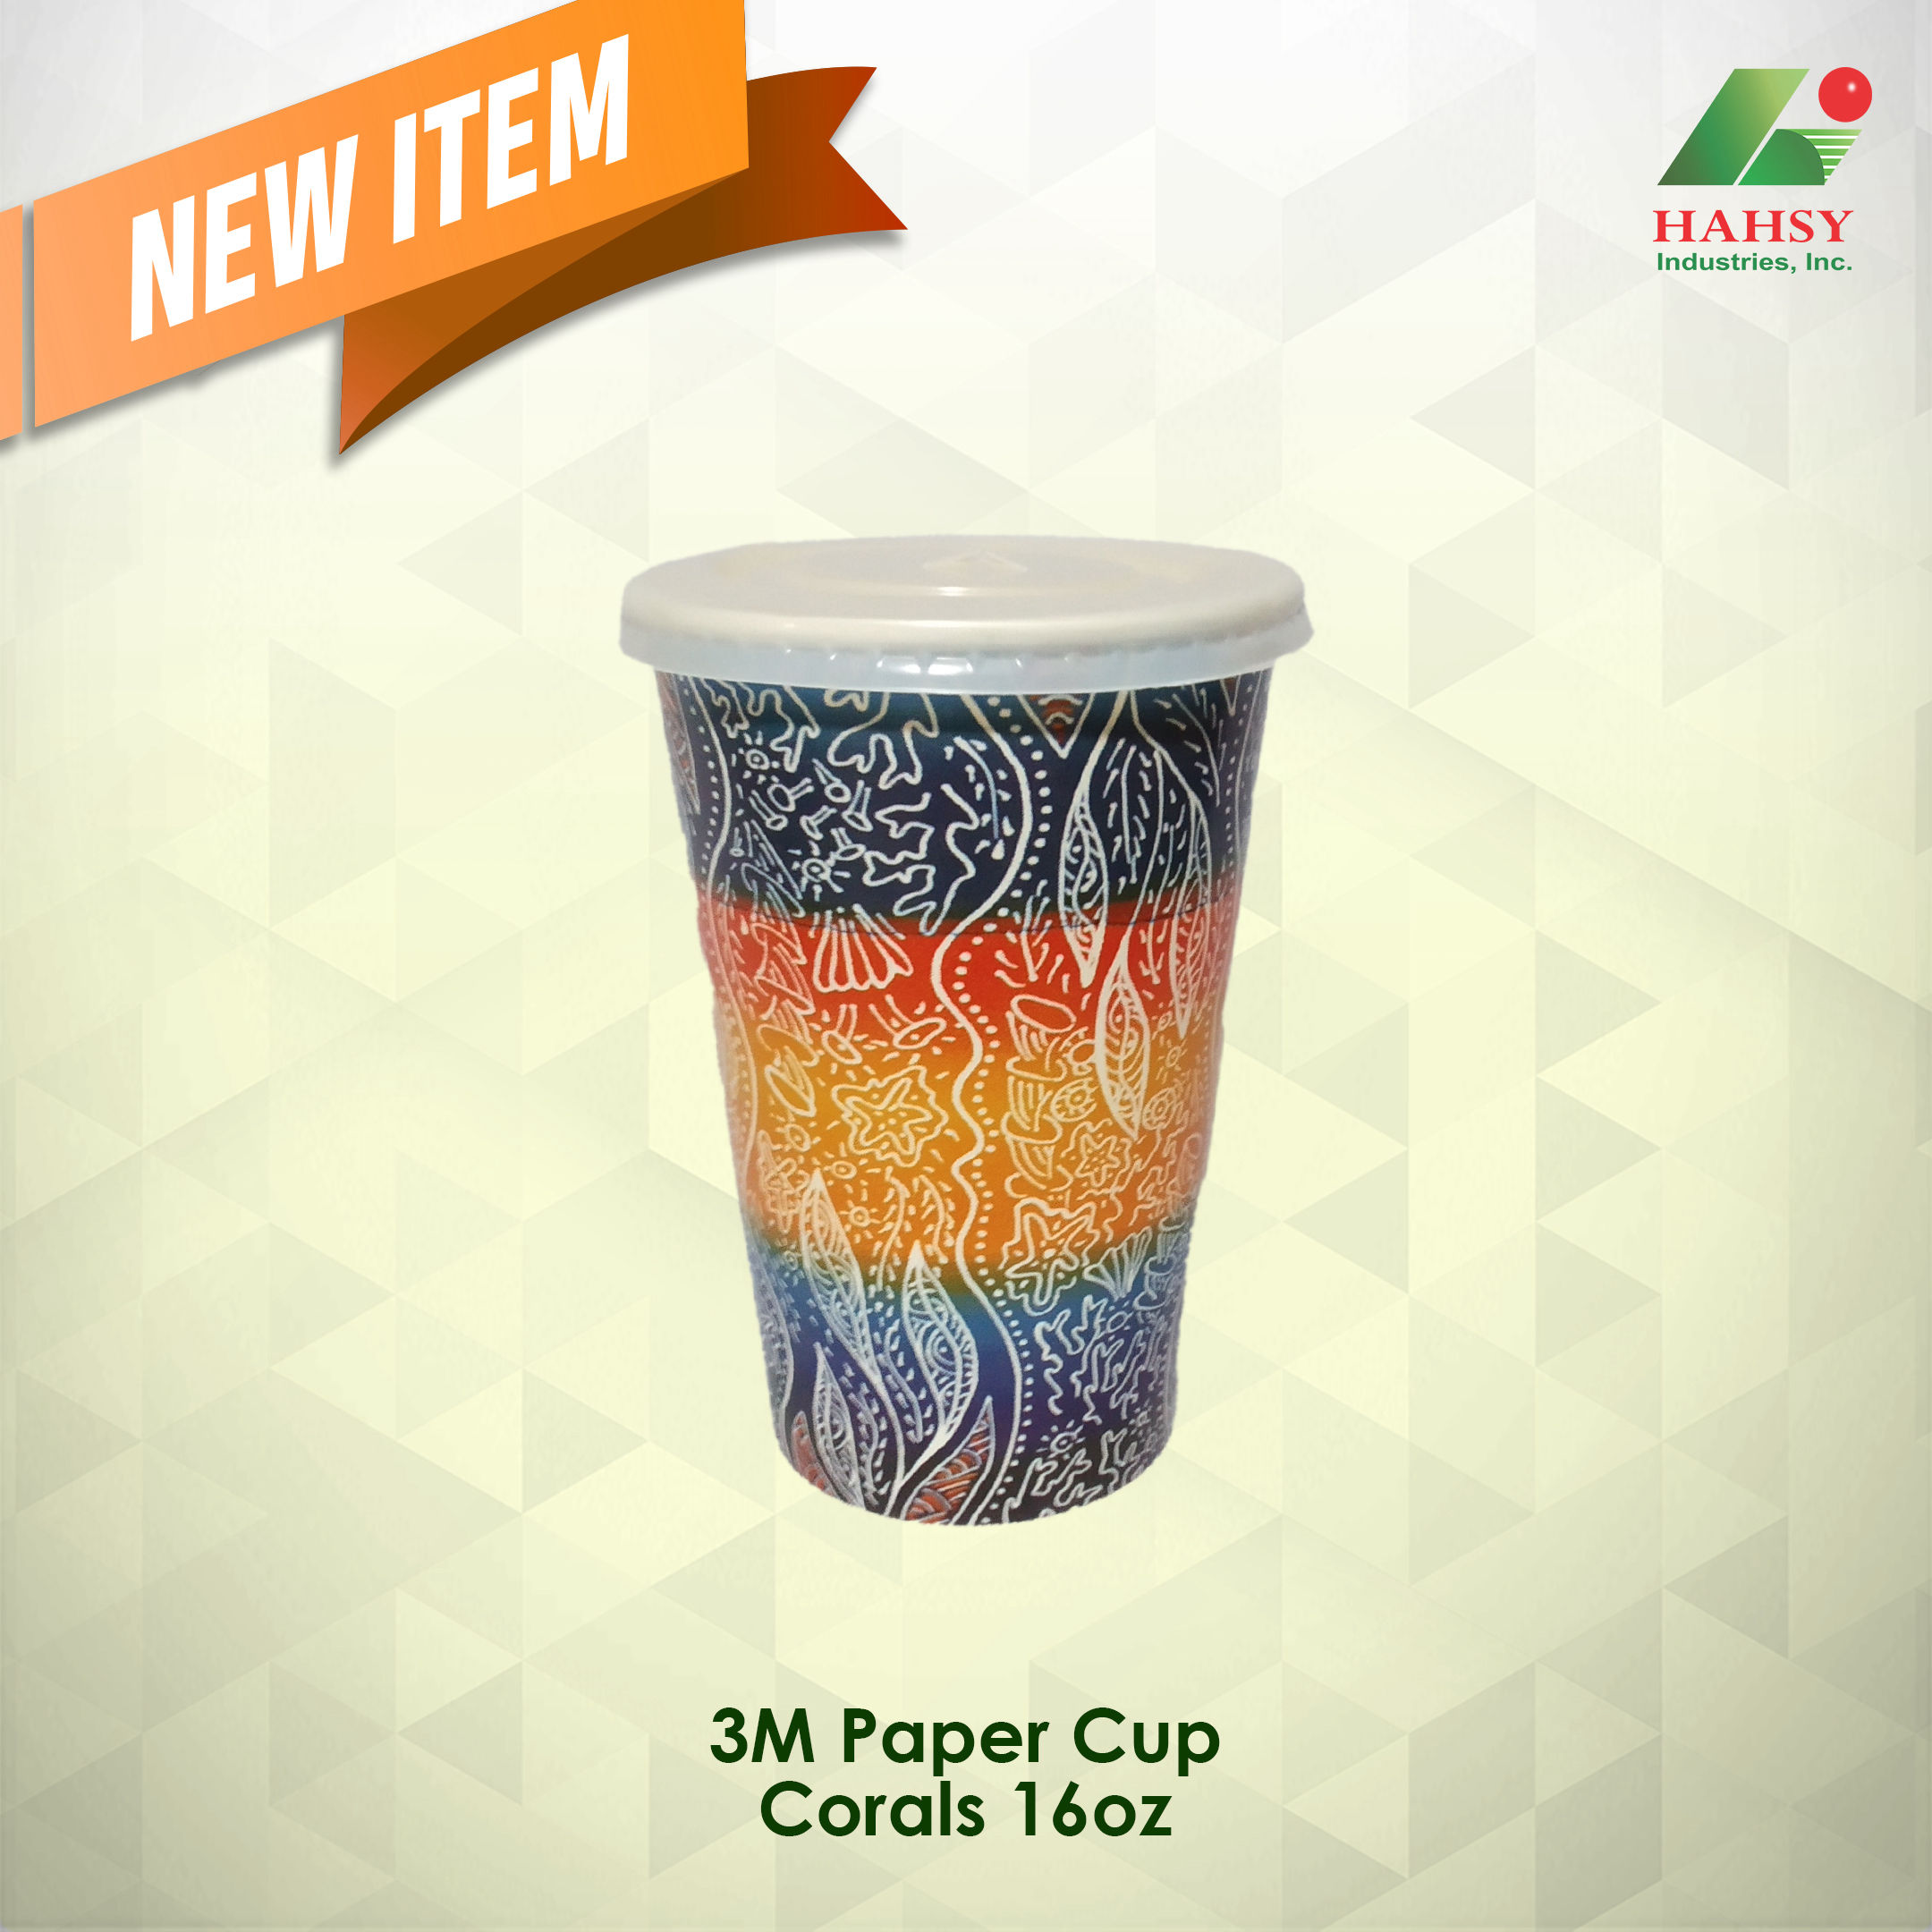 https://www.hahsyindustries.com/assets/images/3m-paper-cup-corals-16oz-2160x2160.jpg